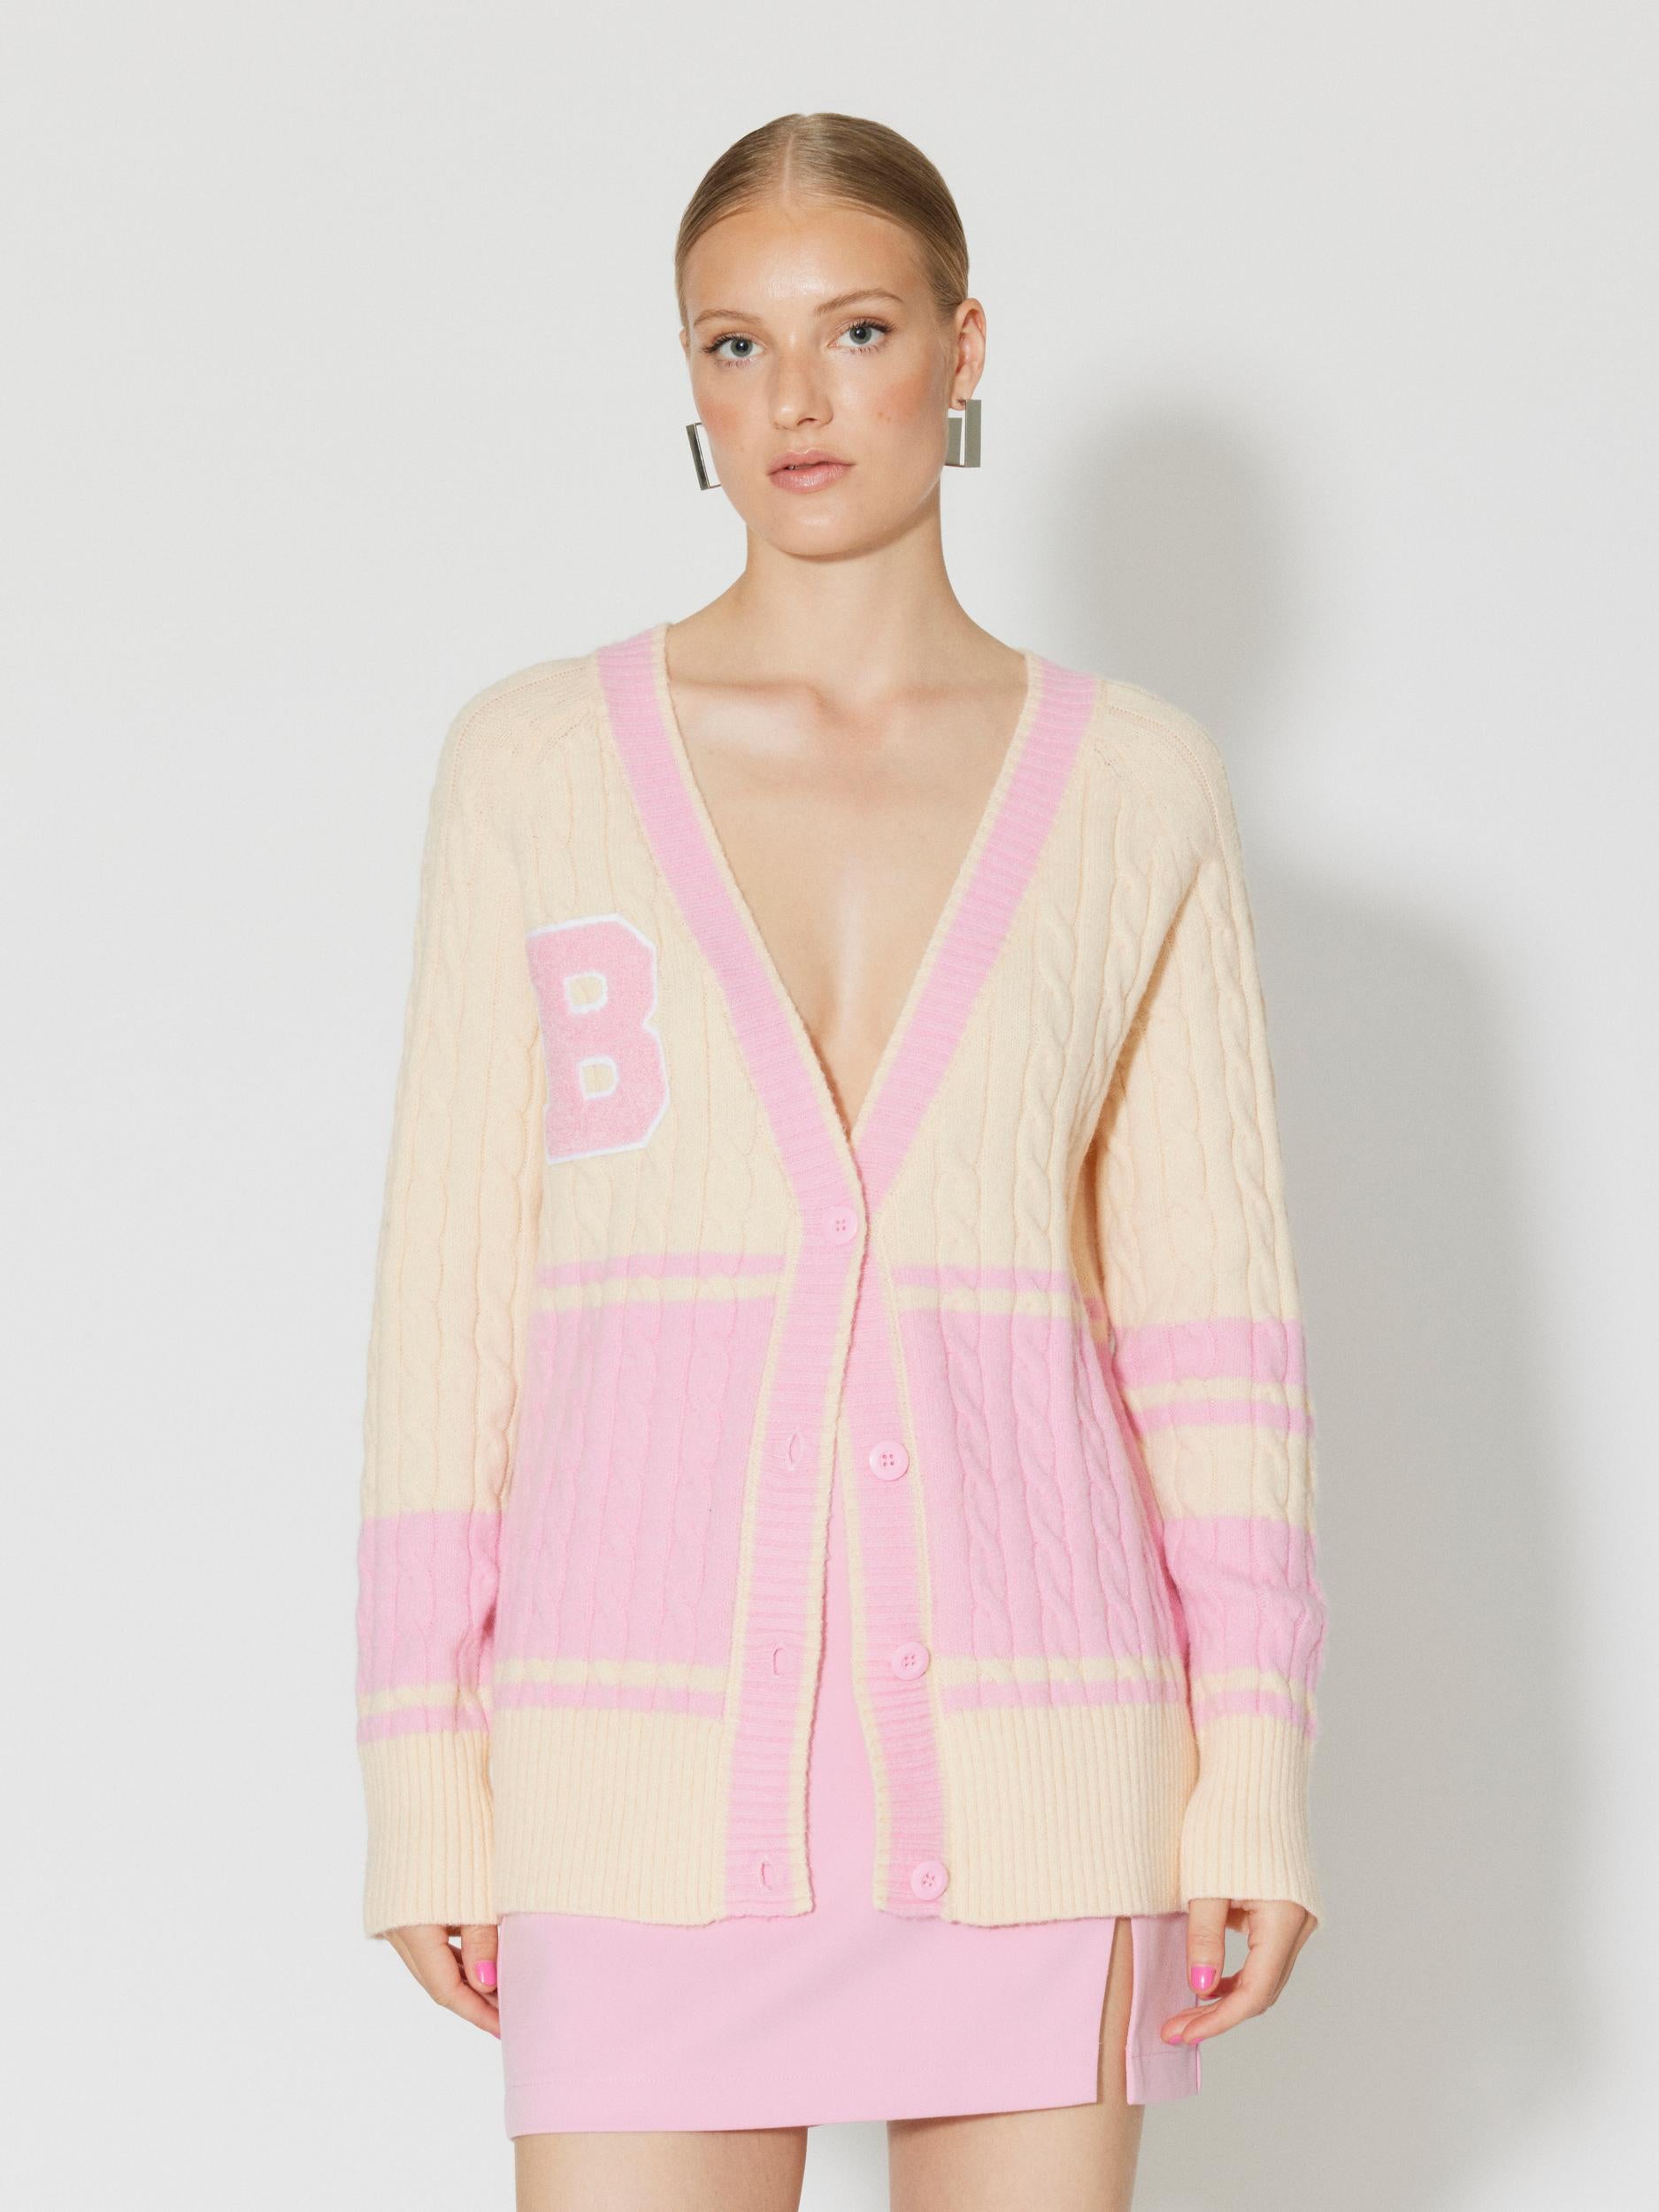 Something New two-tone pink and cream knit cardigan<br>